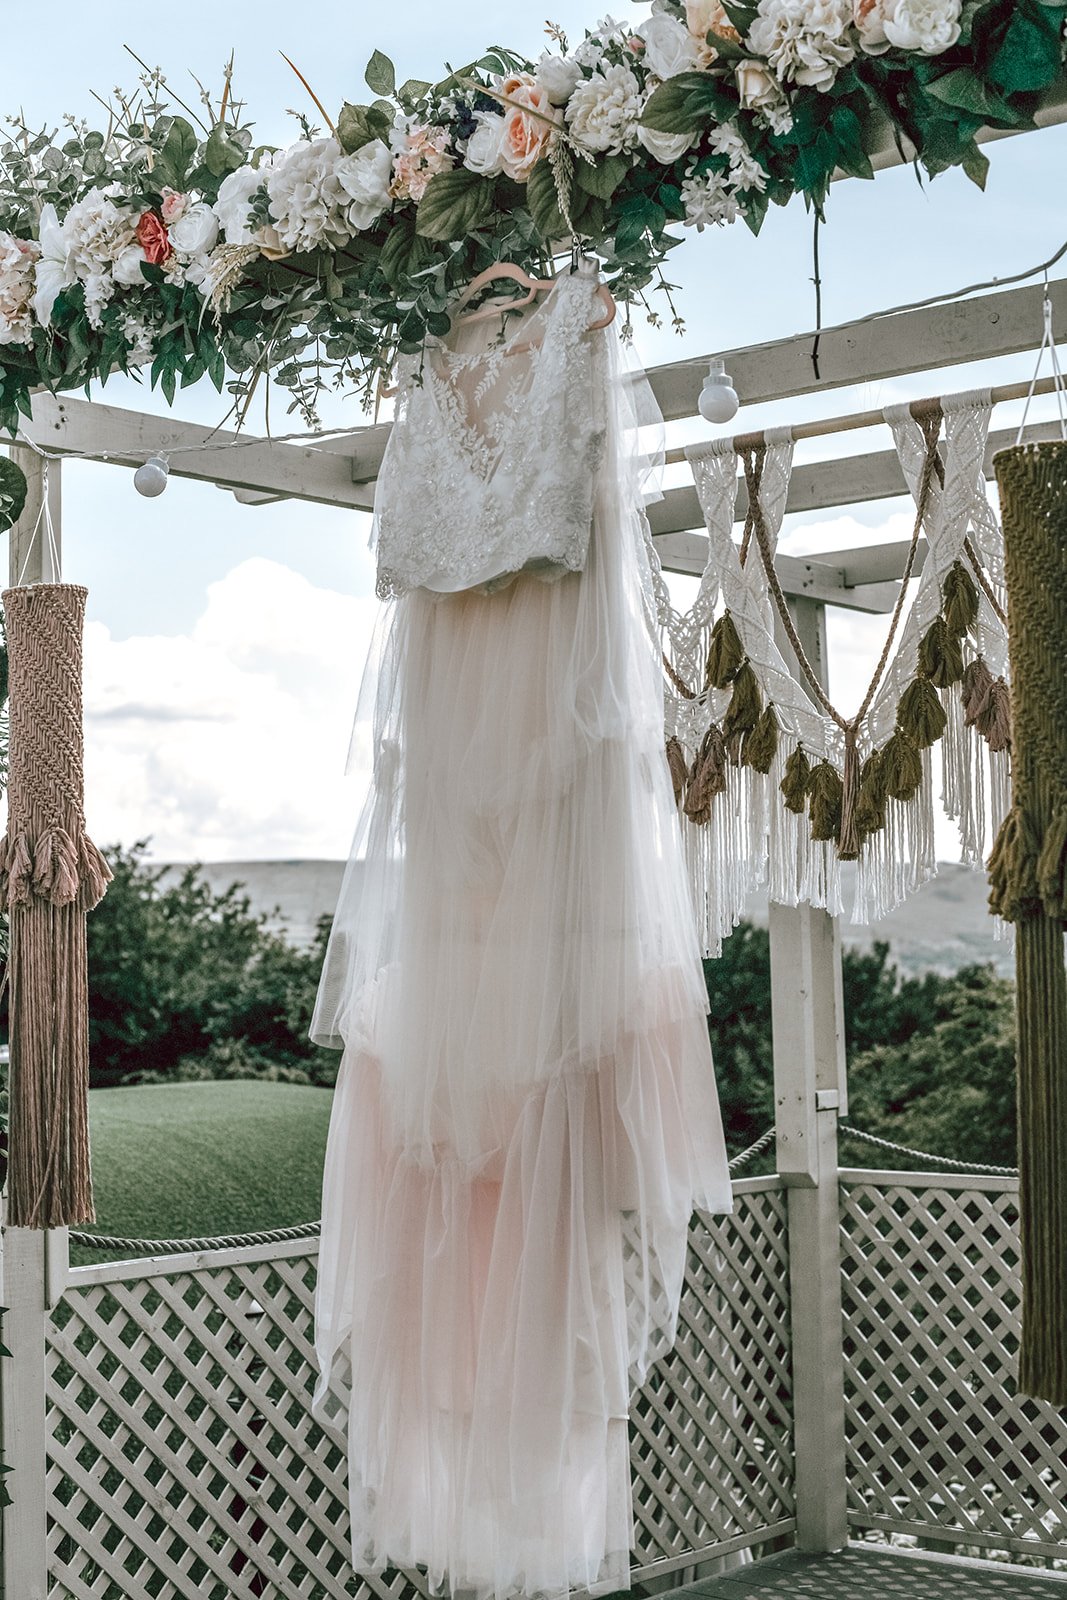 a frilly wedding dress hanging up on a wooden structure with floral decoration